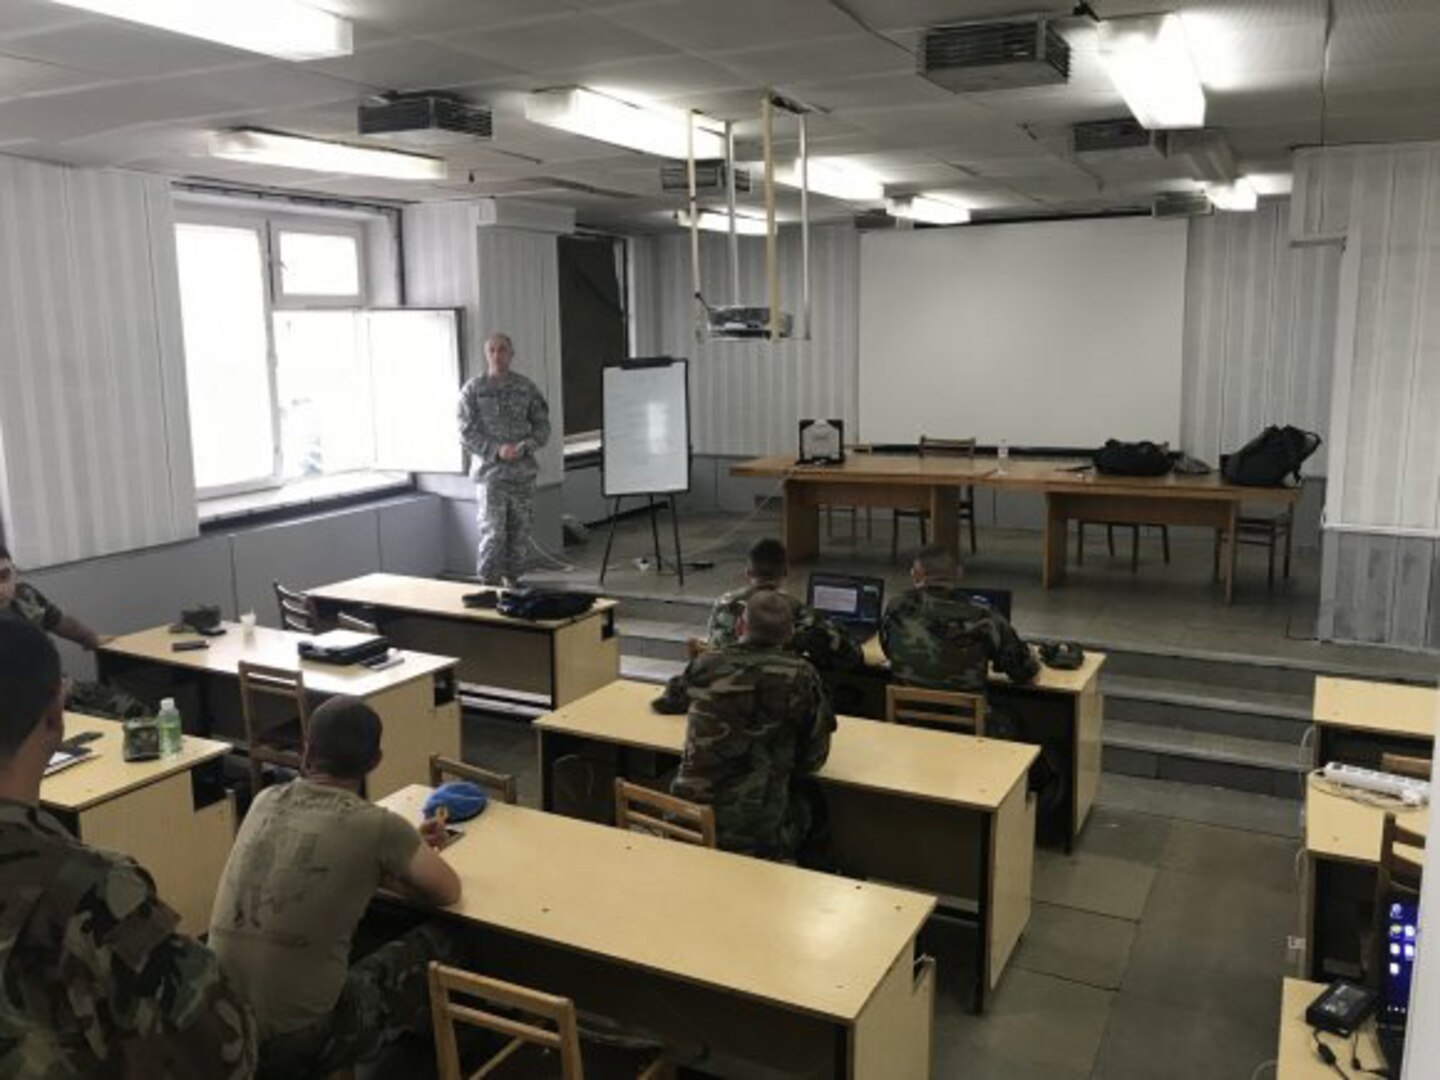 Chief Warrant Officer 4 Donald Champion from the North Carolina National Guard's Joint Force Headquarters briefs members of the Moldovan army Communications Staff during a cyber exercise in Chisinau, Moldova, on July 19, 2018. The event is part of the National Guard's State Partnership Program, established by the Department of Defense. Moldova is a small eastern European country between Ukraine and Romania and has been partners with the NCNG for 22 years.